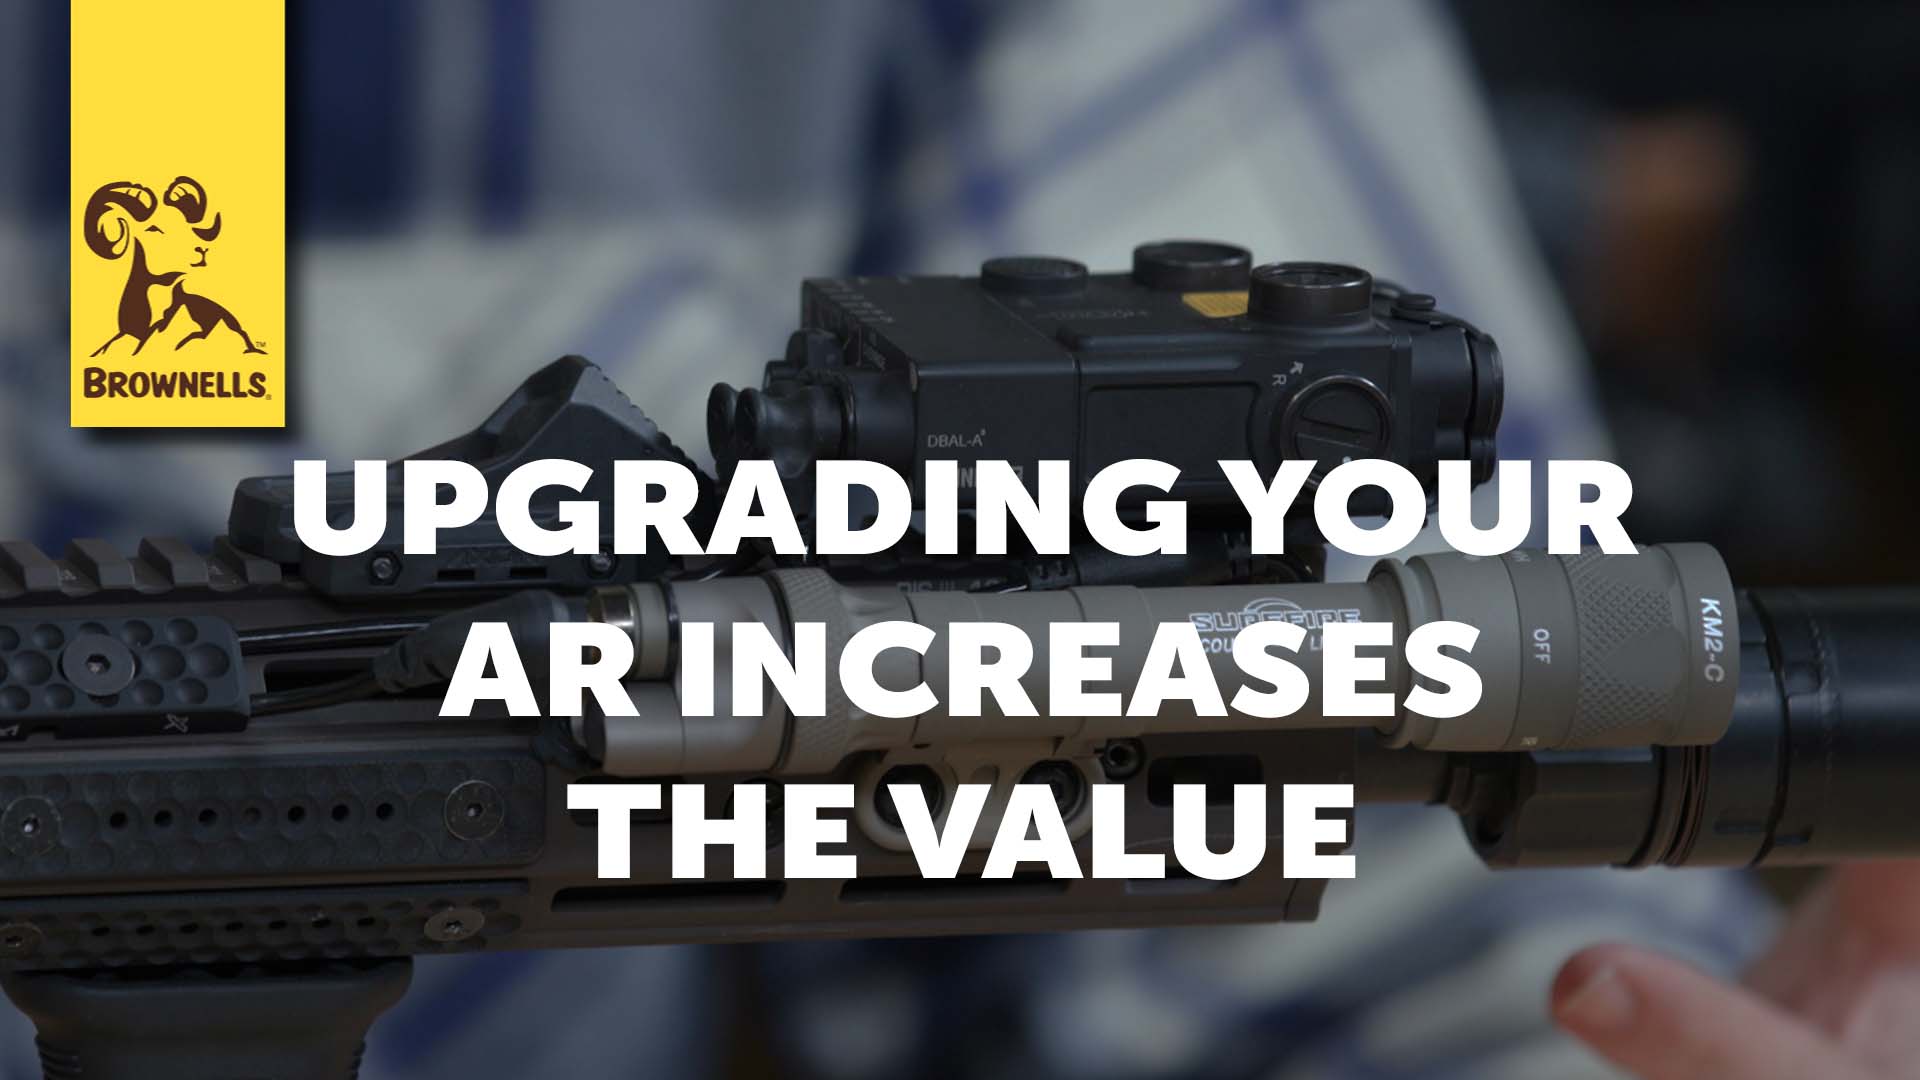 SmythBusters: Upgrading Your Firearm Increases the Value